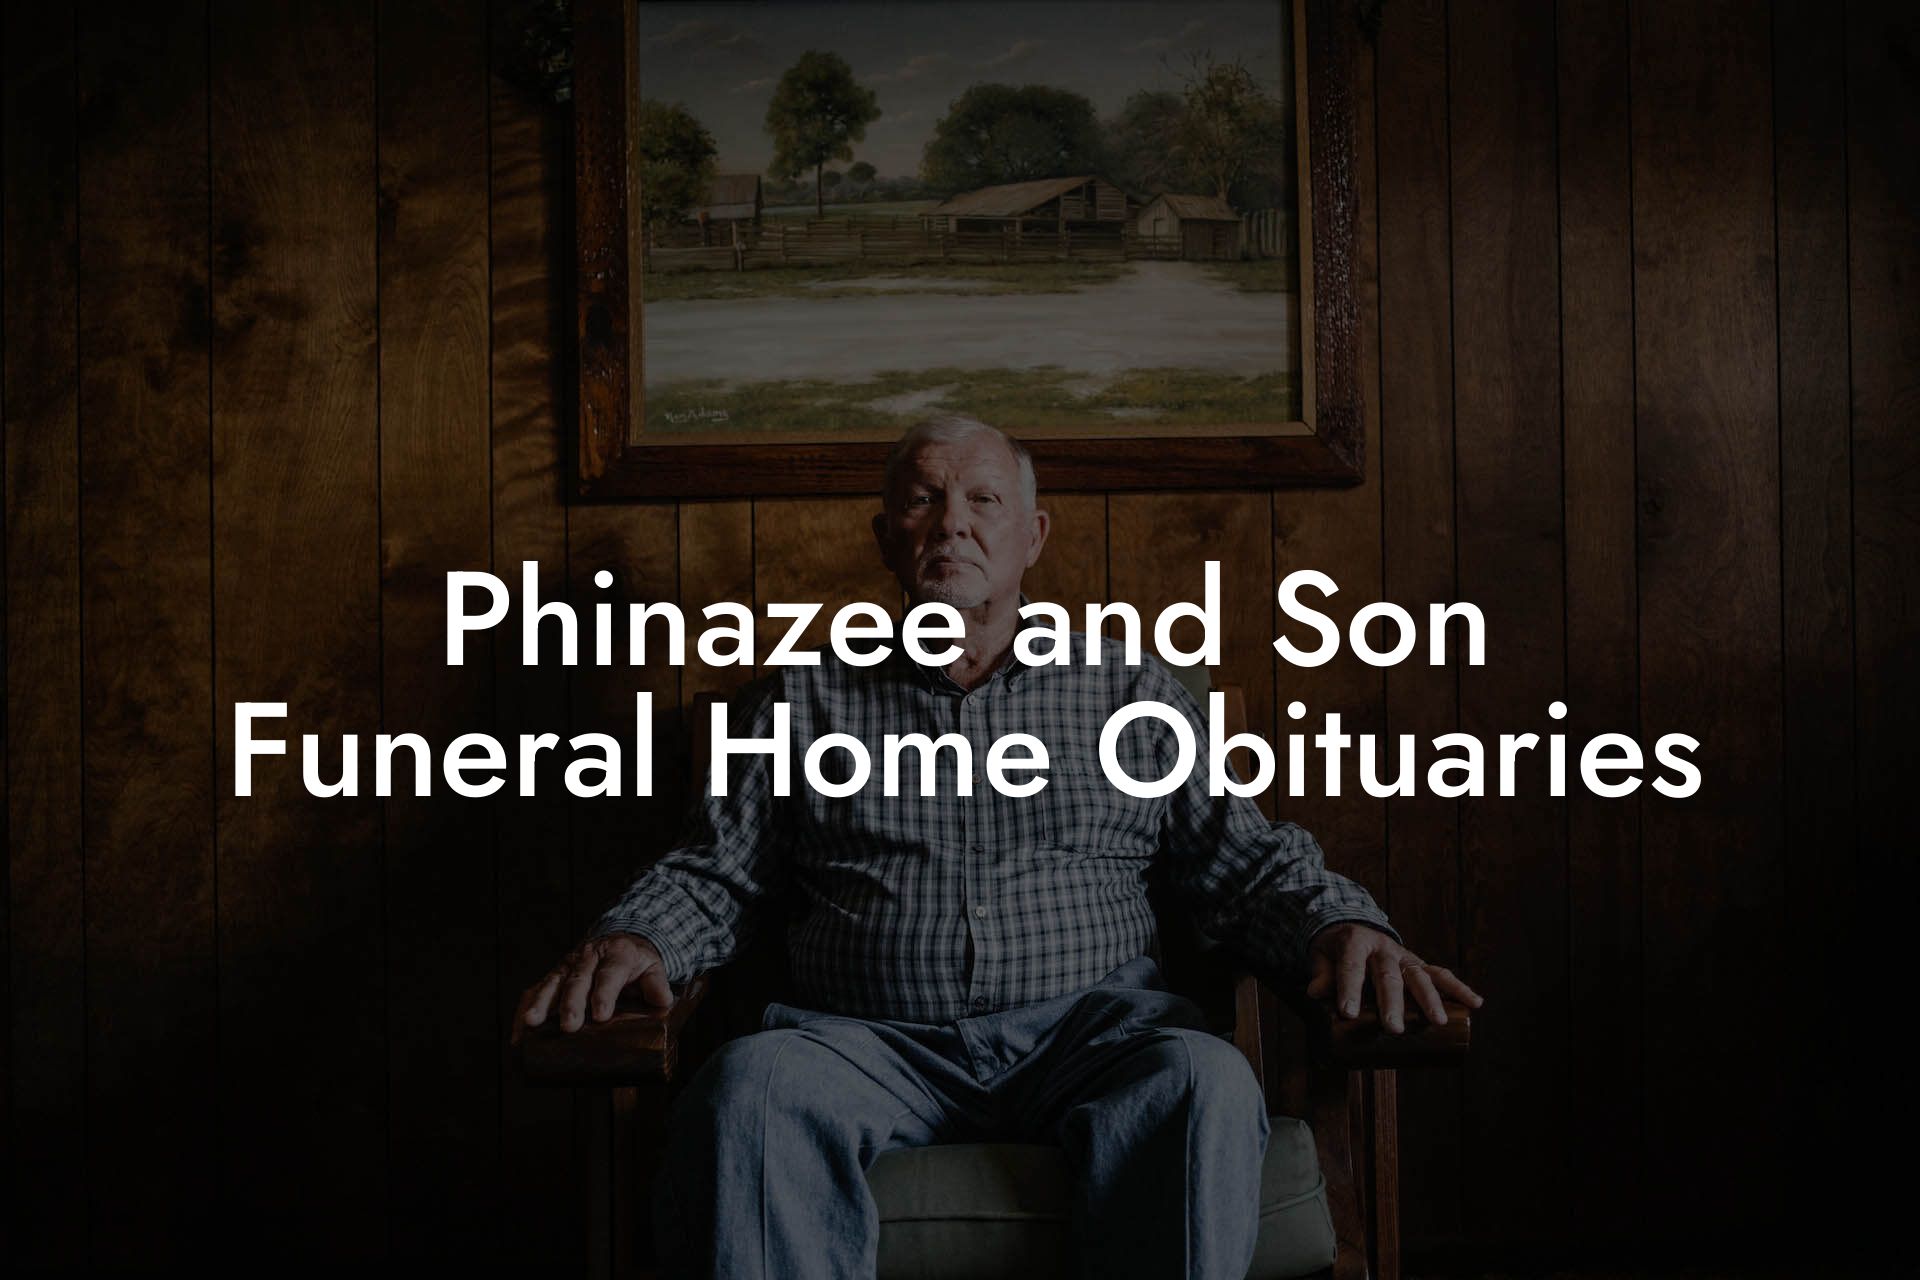 Phinazee and Son Funeral Home Obituaries